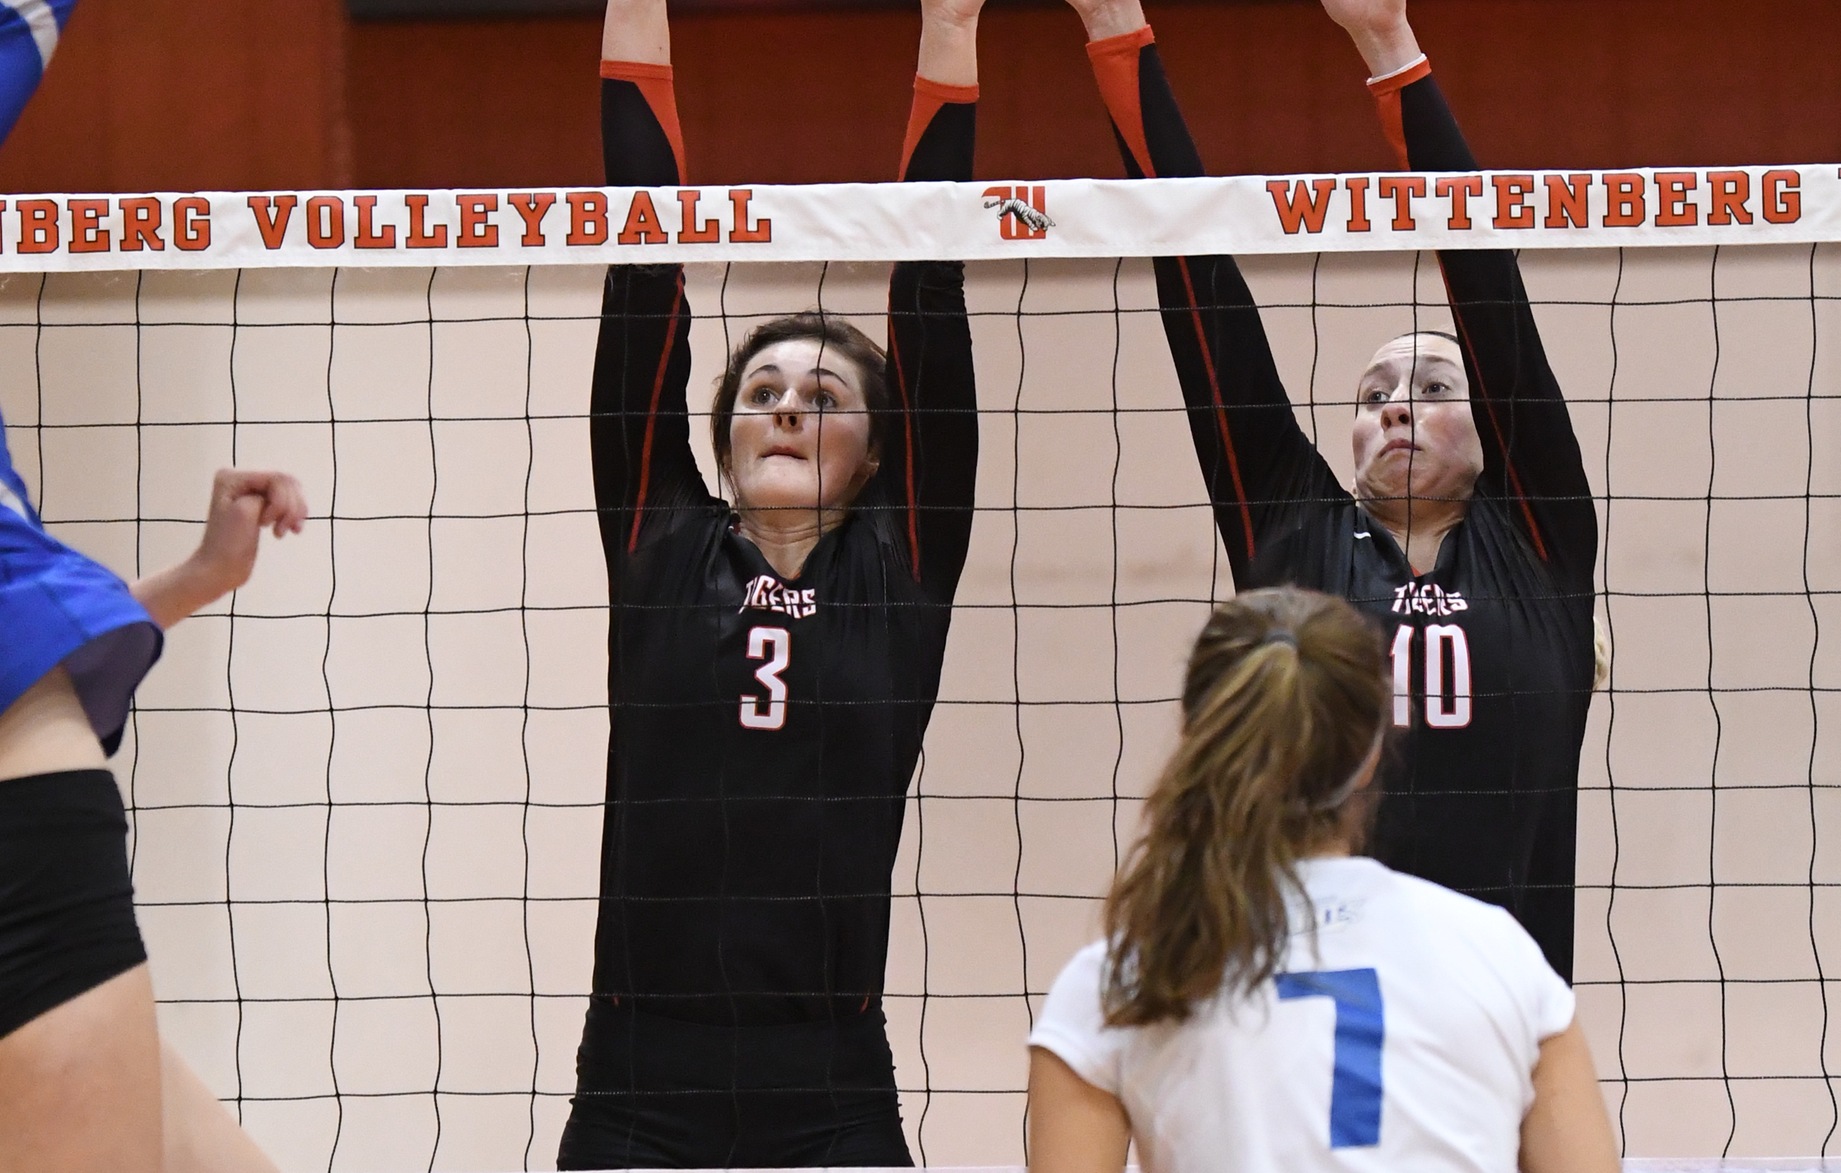 Wittenberg senior Taylor Brown (L) and junior Aubrey Cox (R) helped lead the Tigers to a pair of 3-1 wins over Top-25 opponents on day two of the 2018 Wittenberg Fall Classic